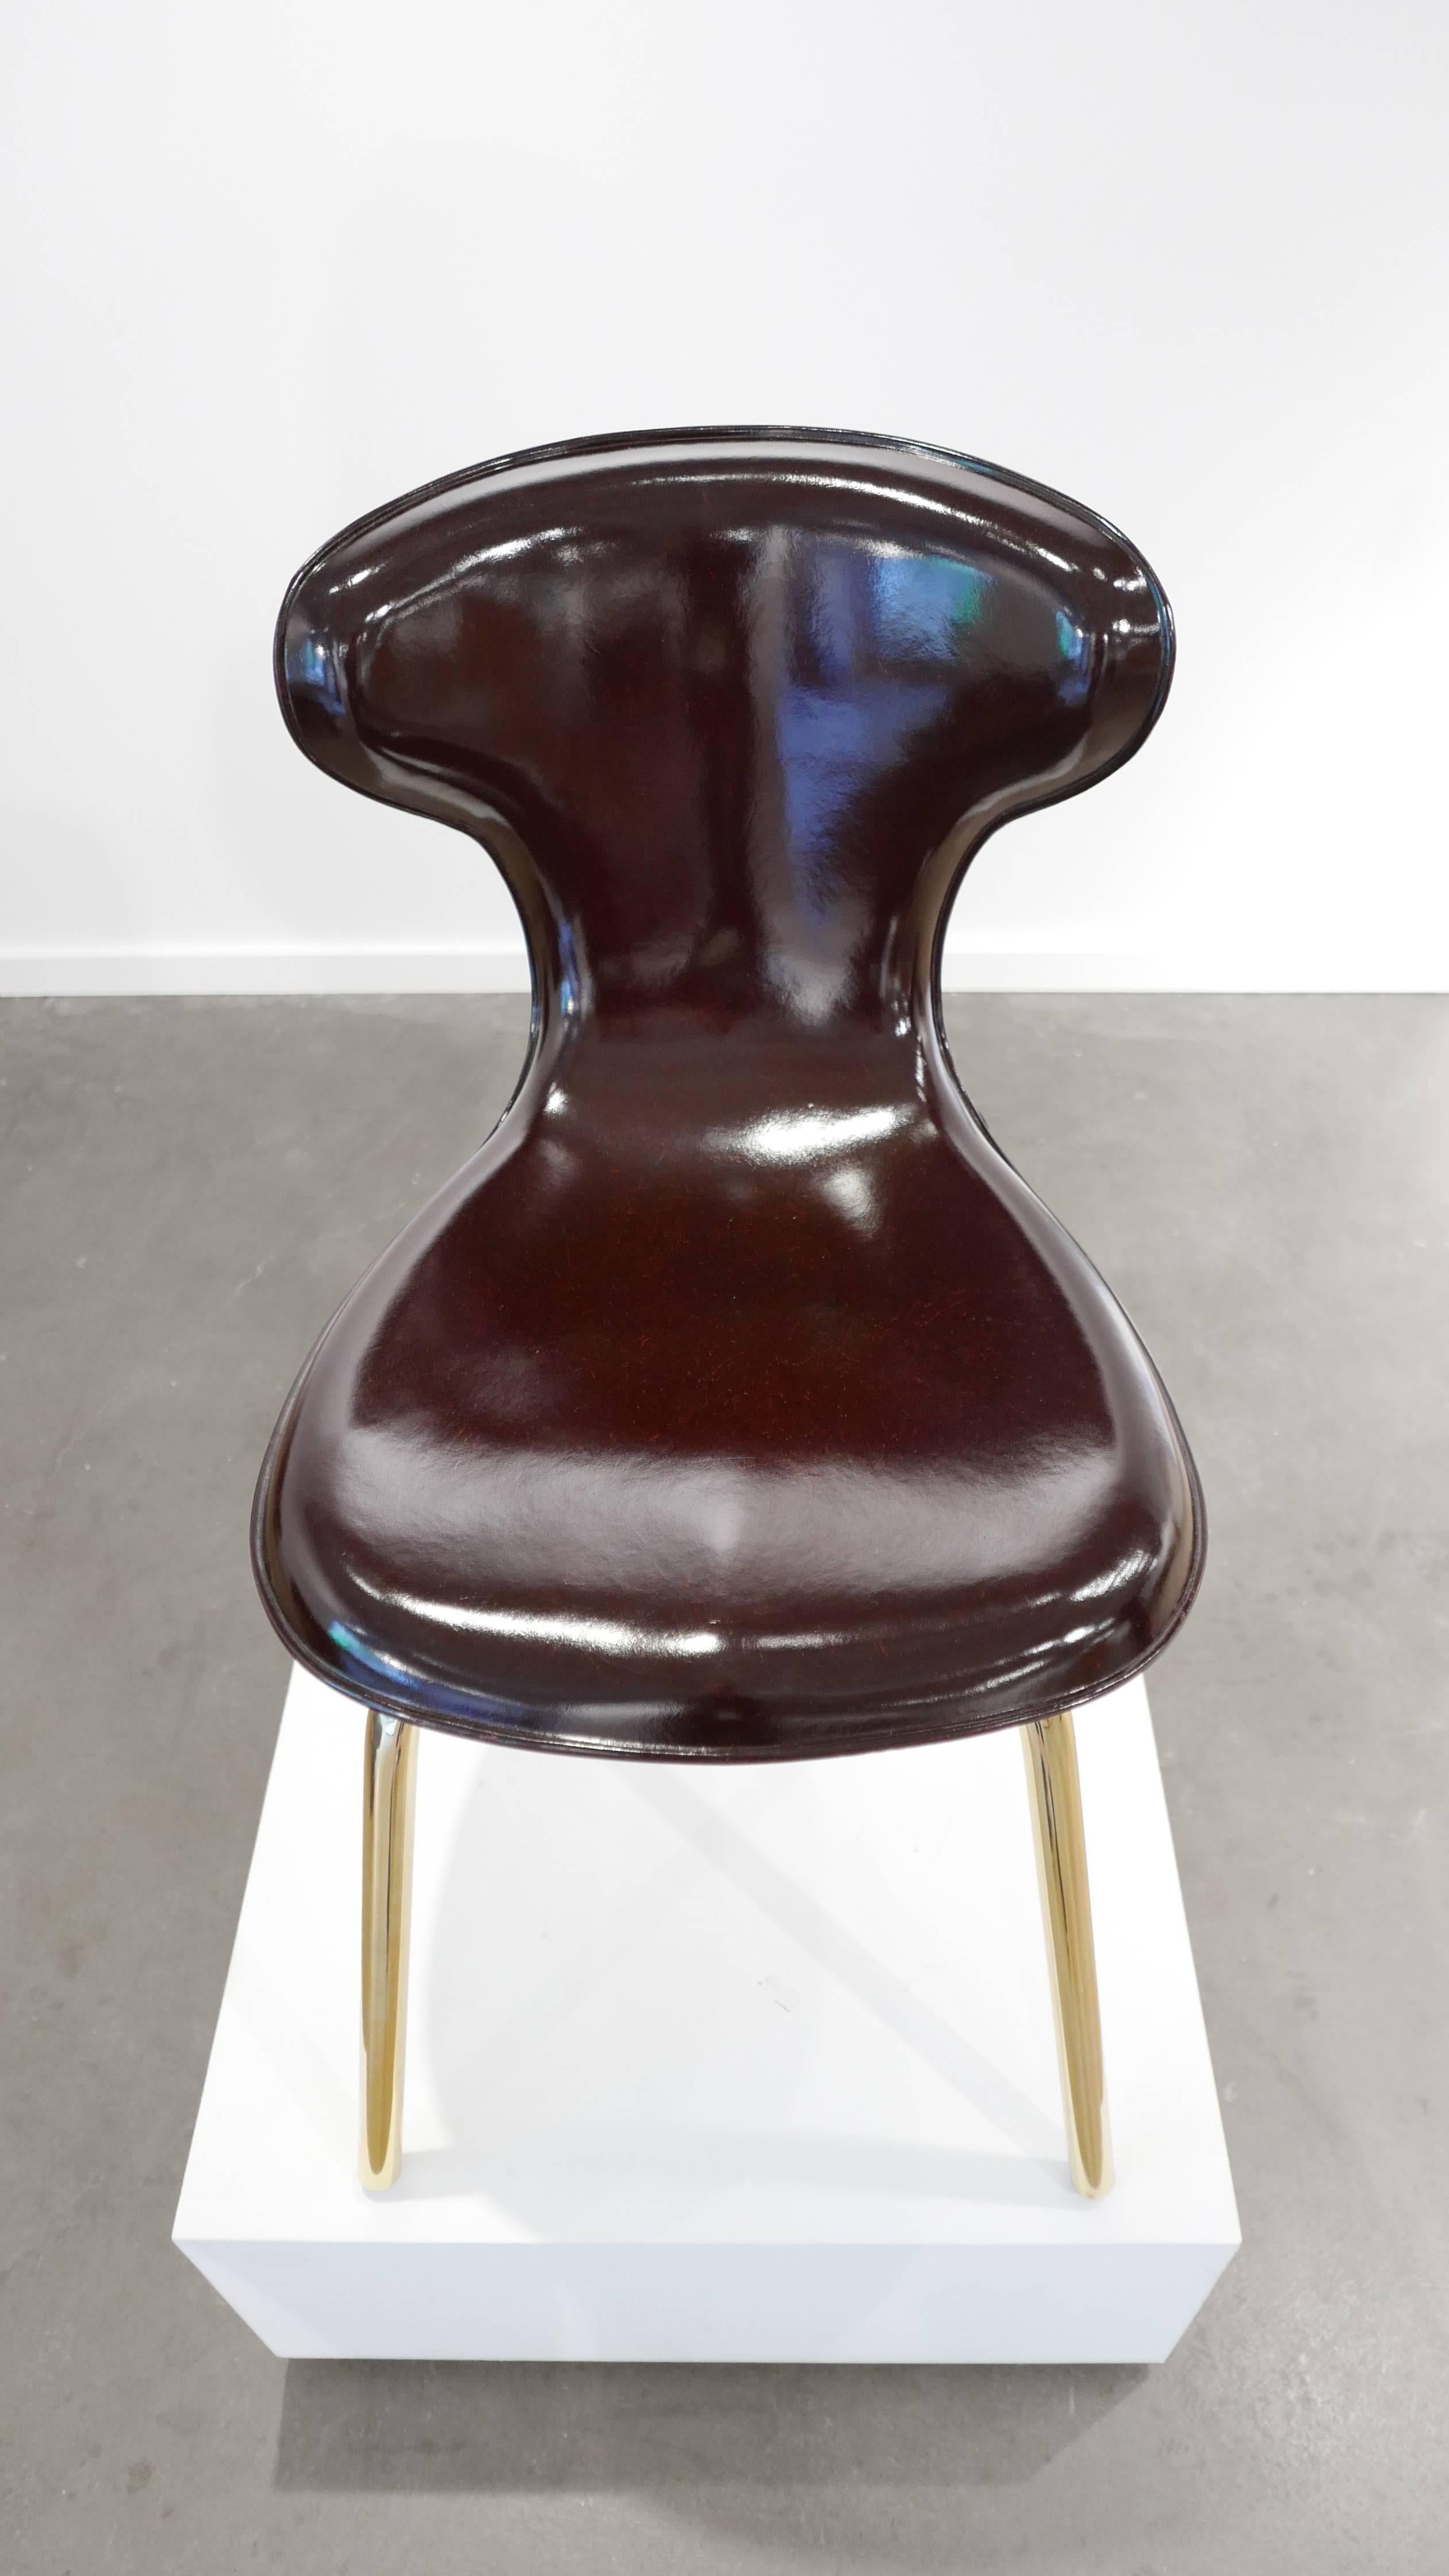 Rare biomorphic molded fiberglass chair designed by Egmont Arens 

Designer: Egmont Arens
Period/style: Mid-Century 
Country: US
Date: 1950s.